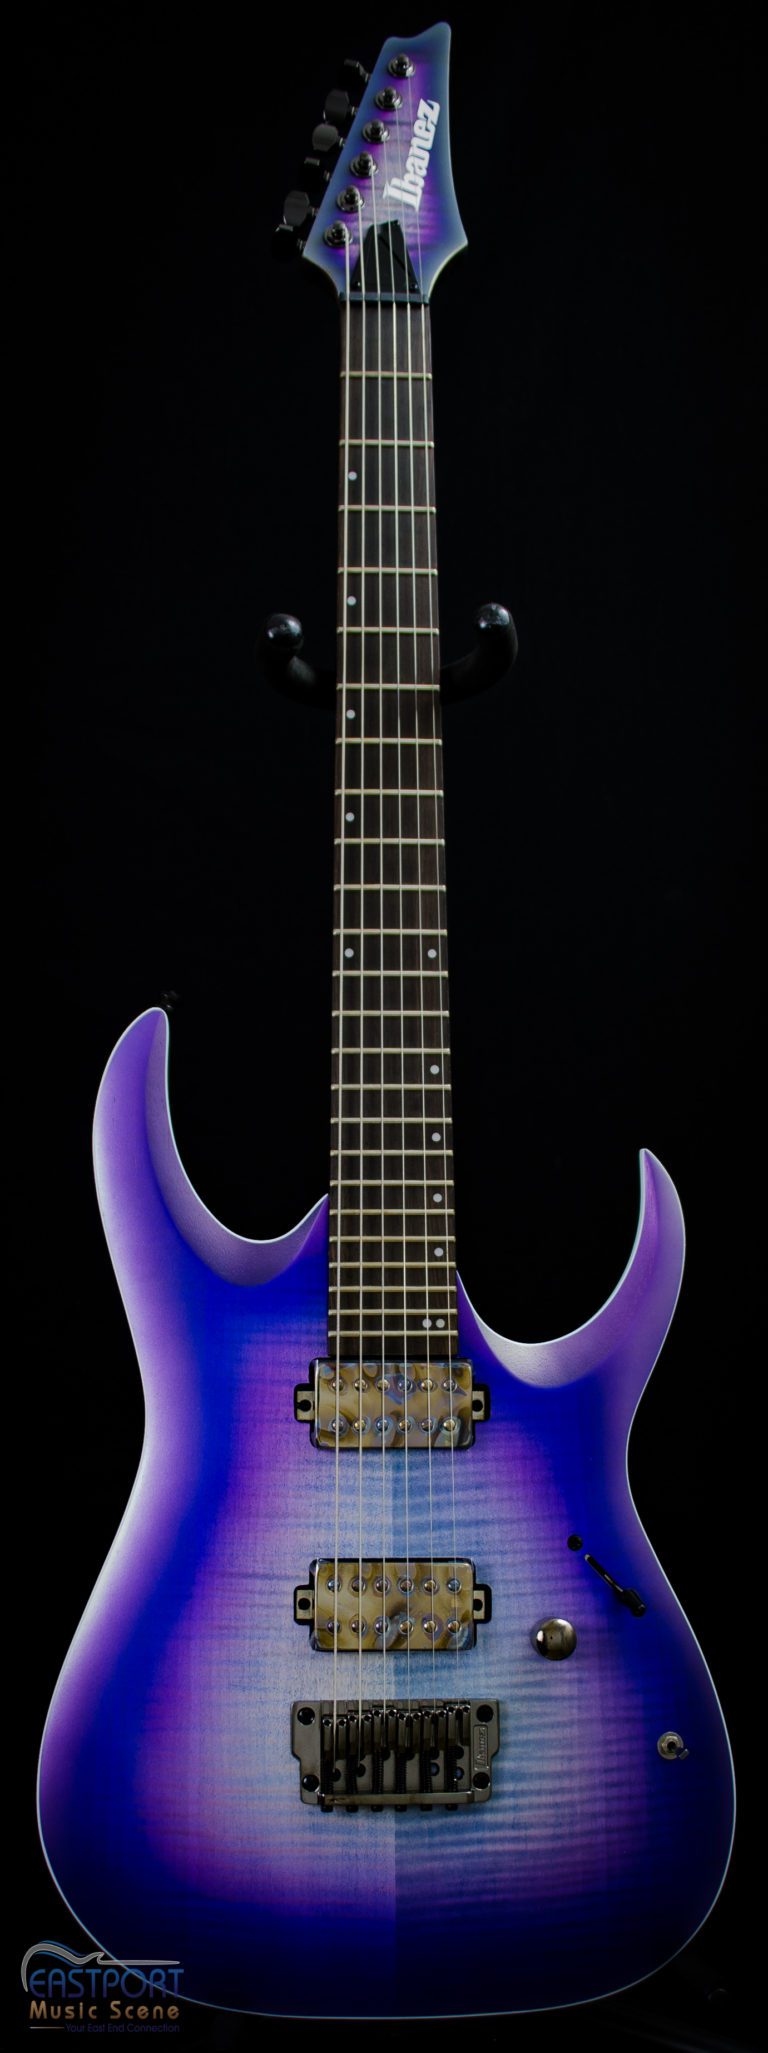 A purple electric guitar with black trim and strings.